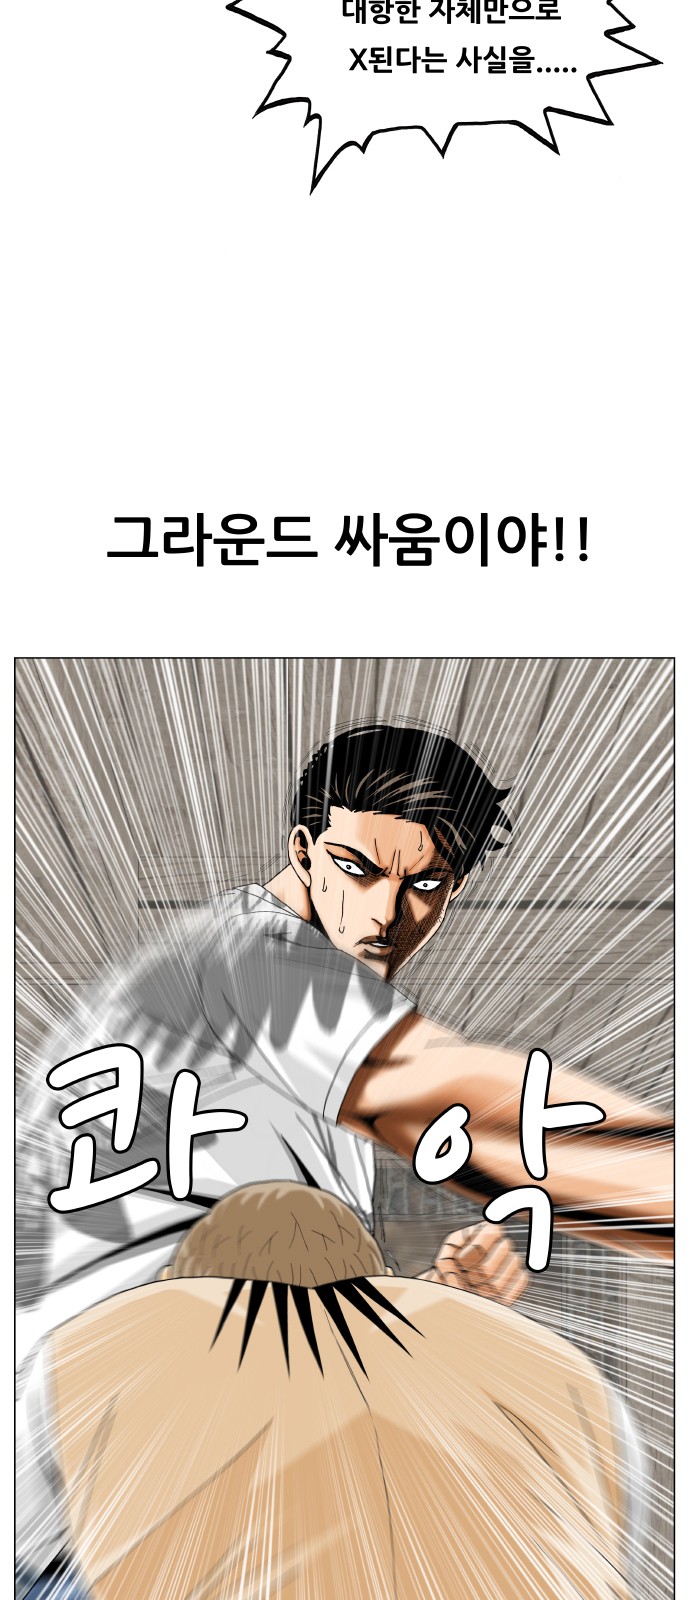 Ultimate Legend - Kang Hae Hyo - Chapter 416 - Page 3